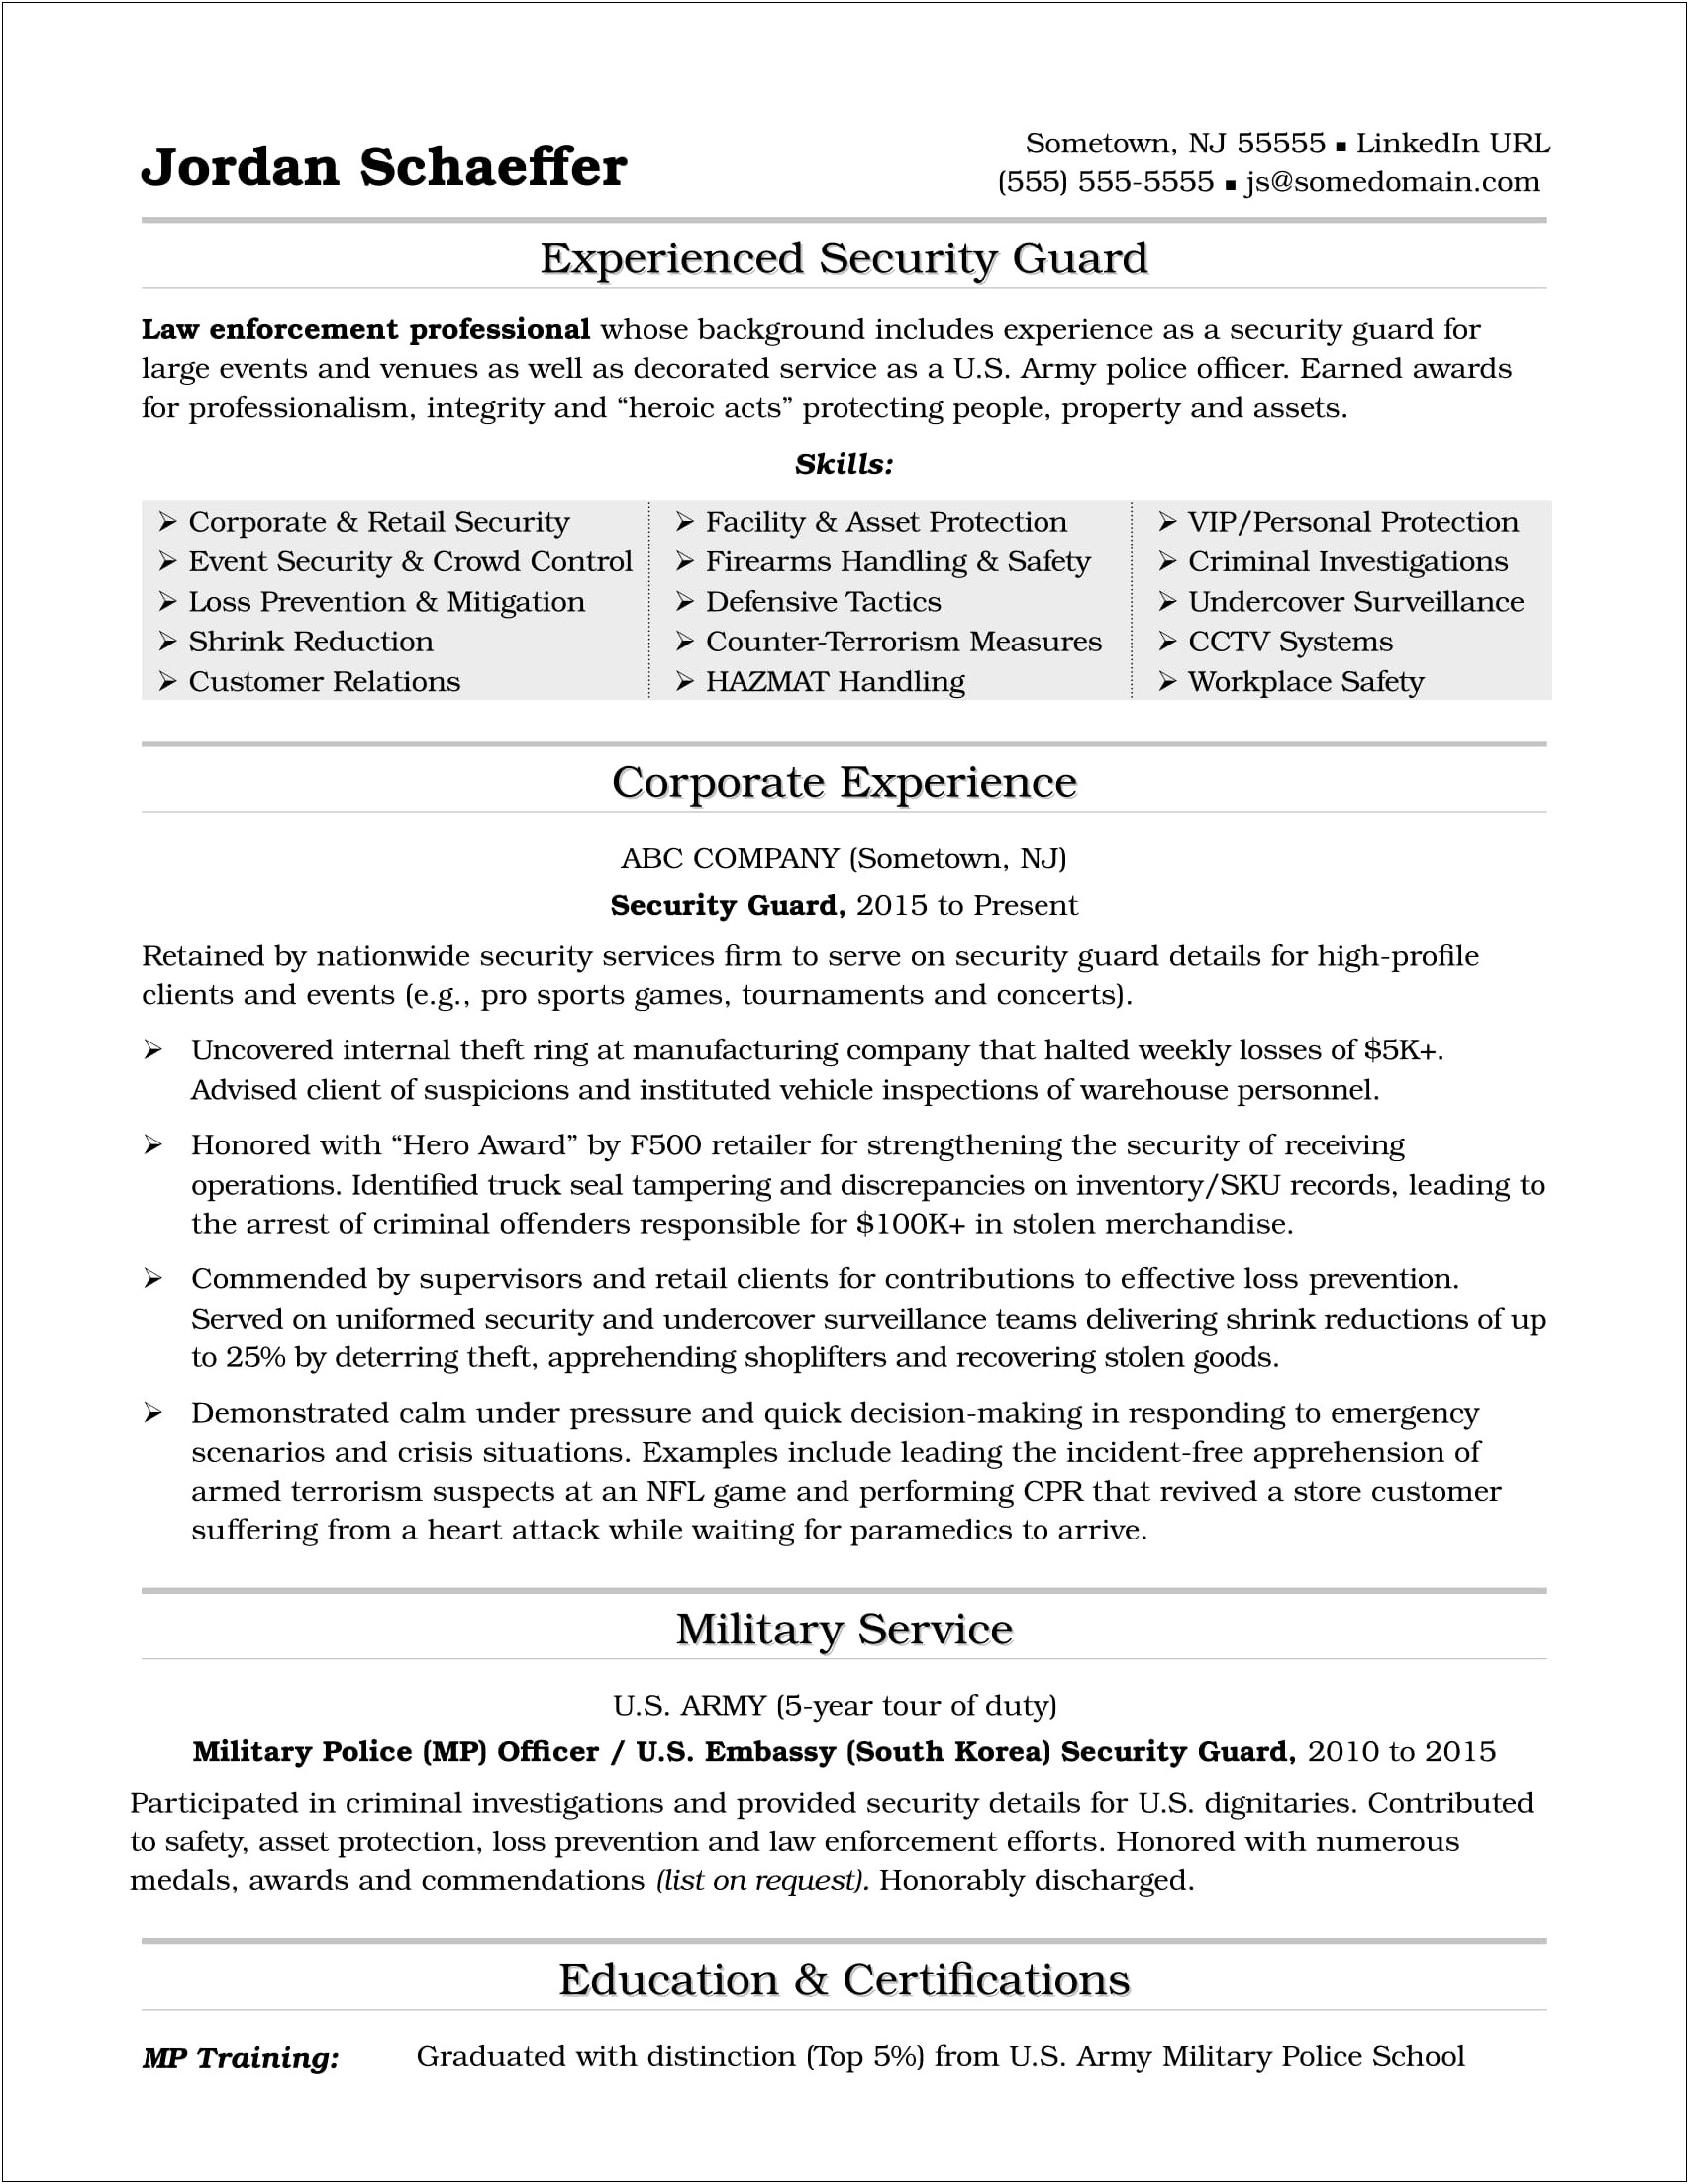 Resume Summary For Security Job